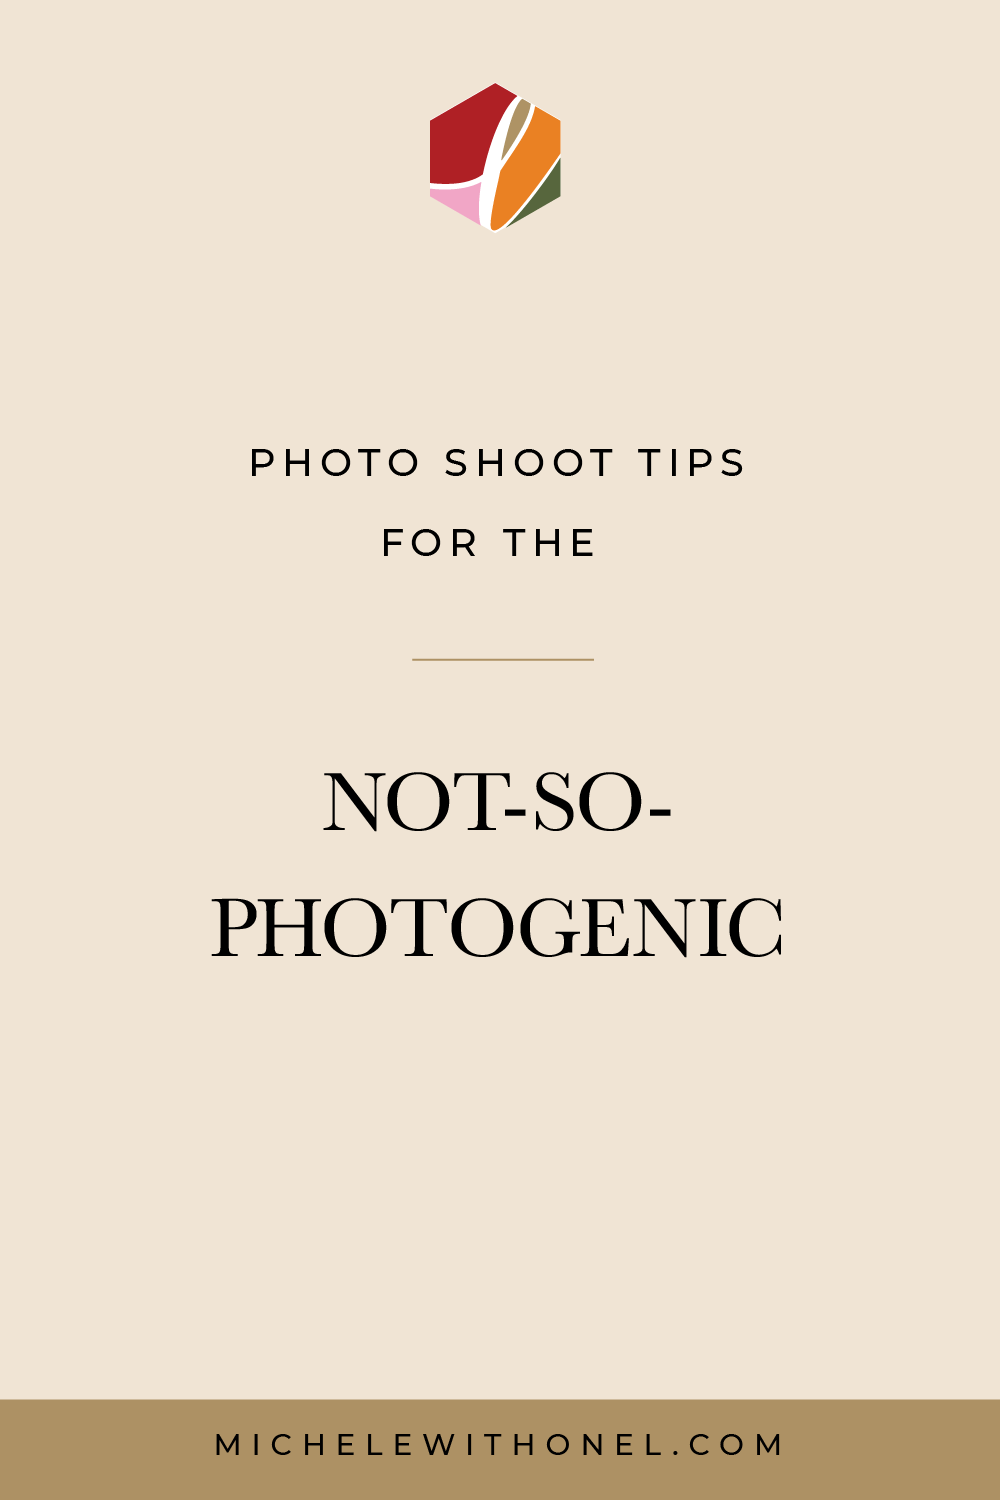 “I’m just not that photogenic!!” If that sounds like something you would say, these 3 photo shoot tips are for you! The real reason you’re not photogenic has nothing to do with you and everything to do with the photographer. Head over to the blog post to find out how to find a photographer who flatters, and how to get comfortable in front of the camera. #photographytips #photoshoot #photography #marketing